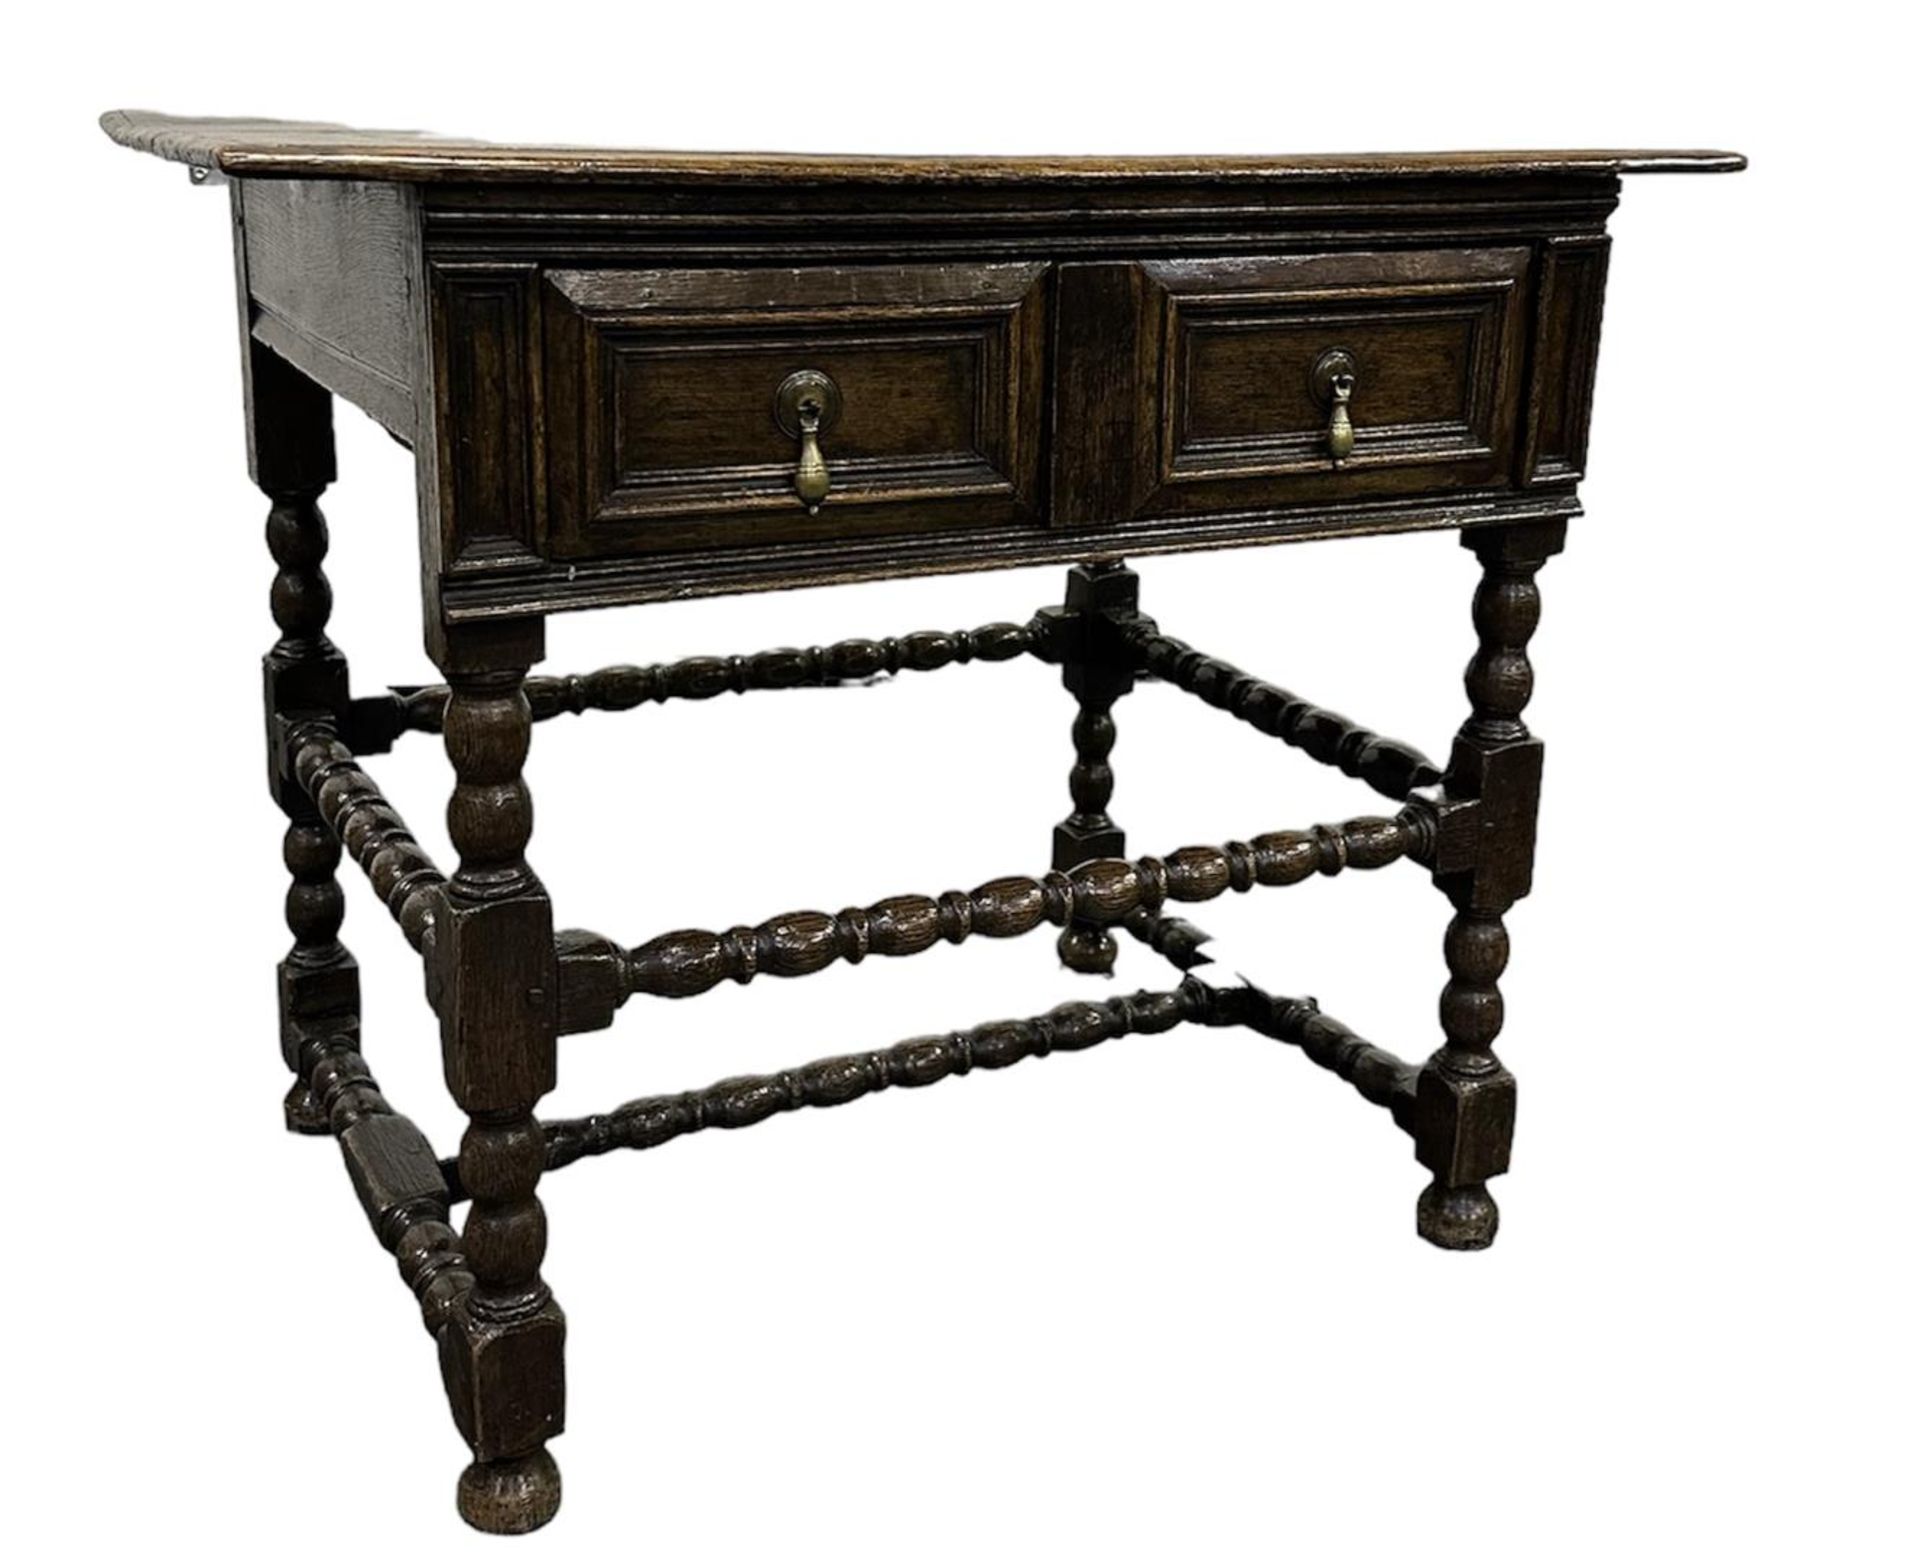 An oak table on turned legs and with ditto rules. England, 18th/19th century. - Image 2 of 2